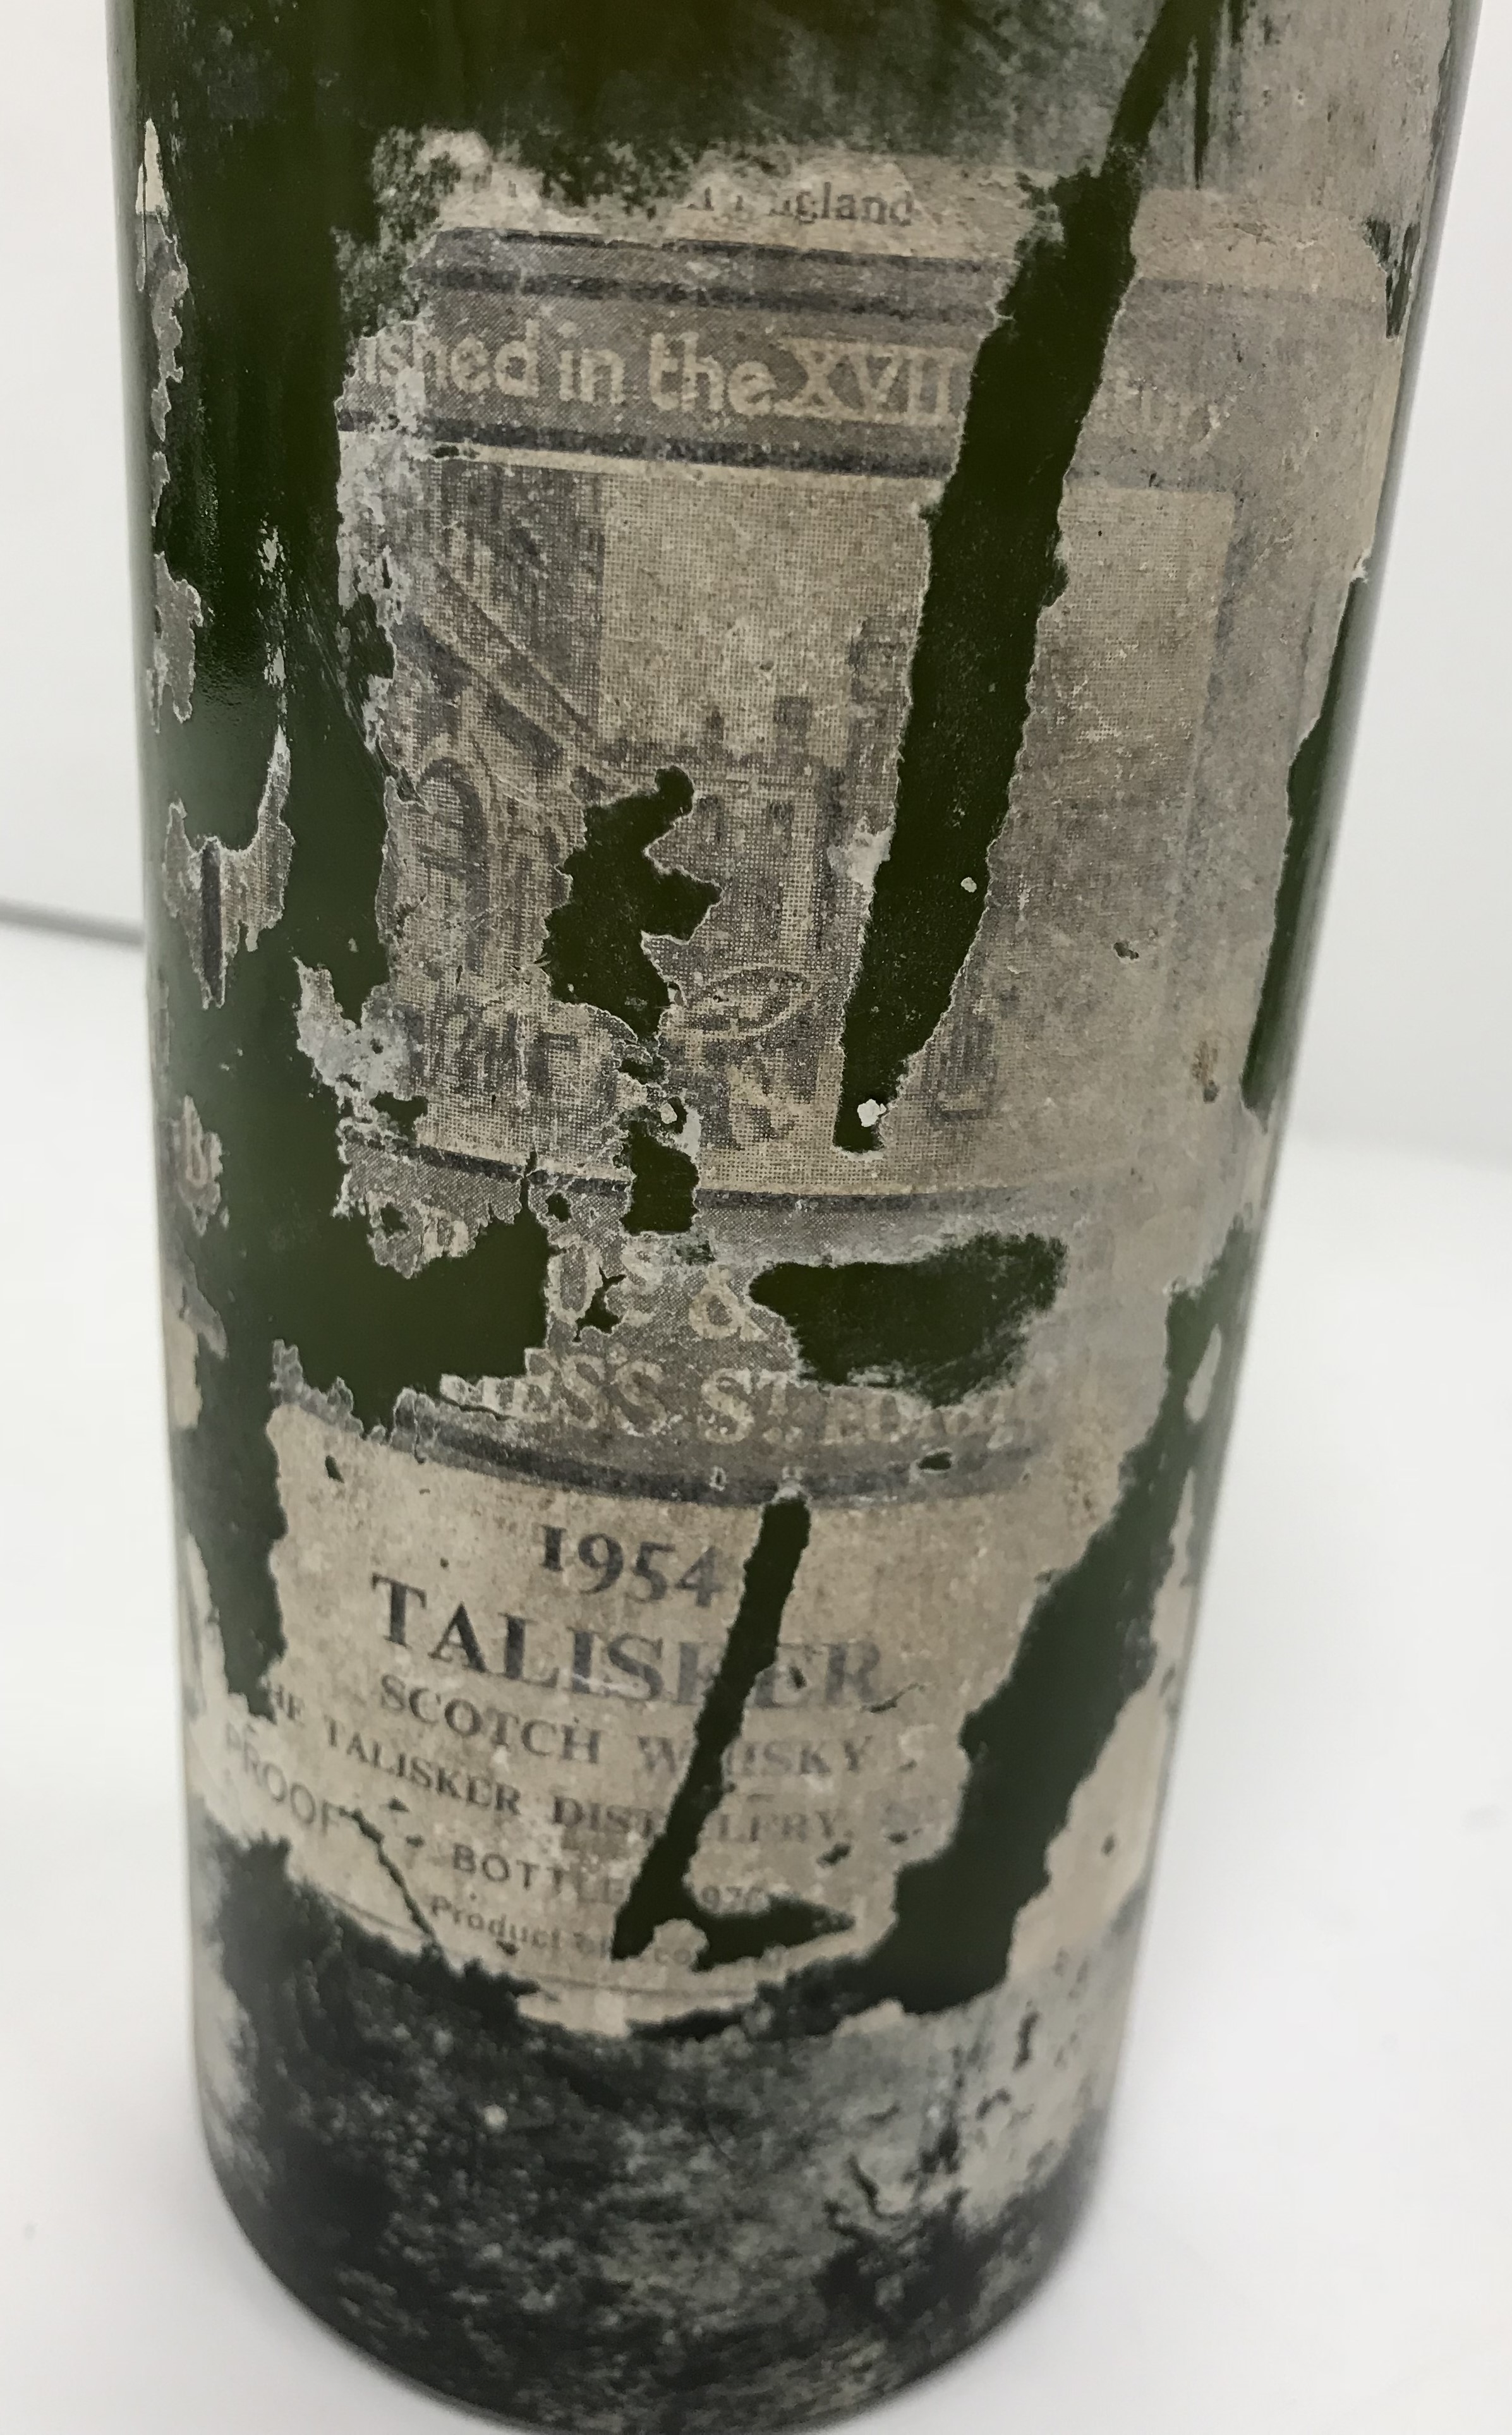 One bottle Talisker Scotch Whisky for Berry Brothers & Rudd 1954, - Image 2 of 4